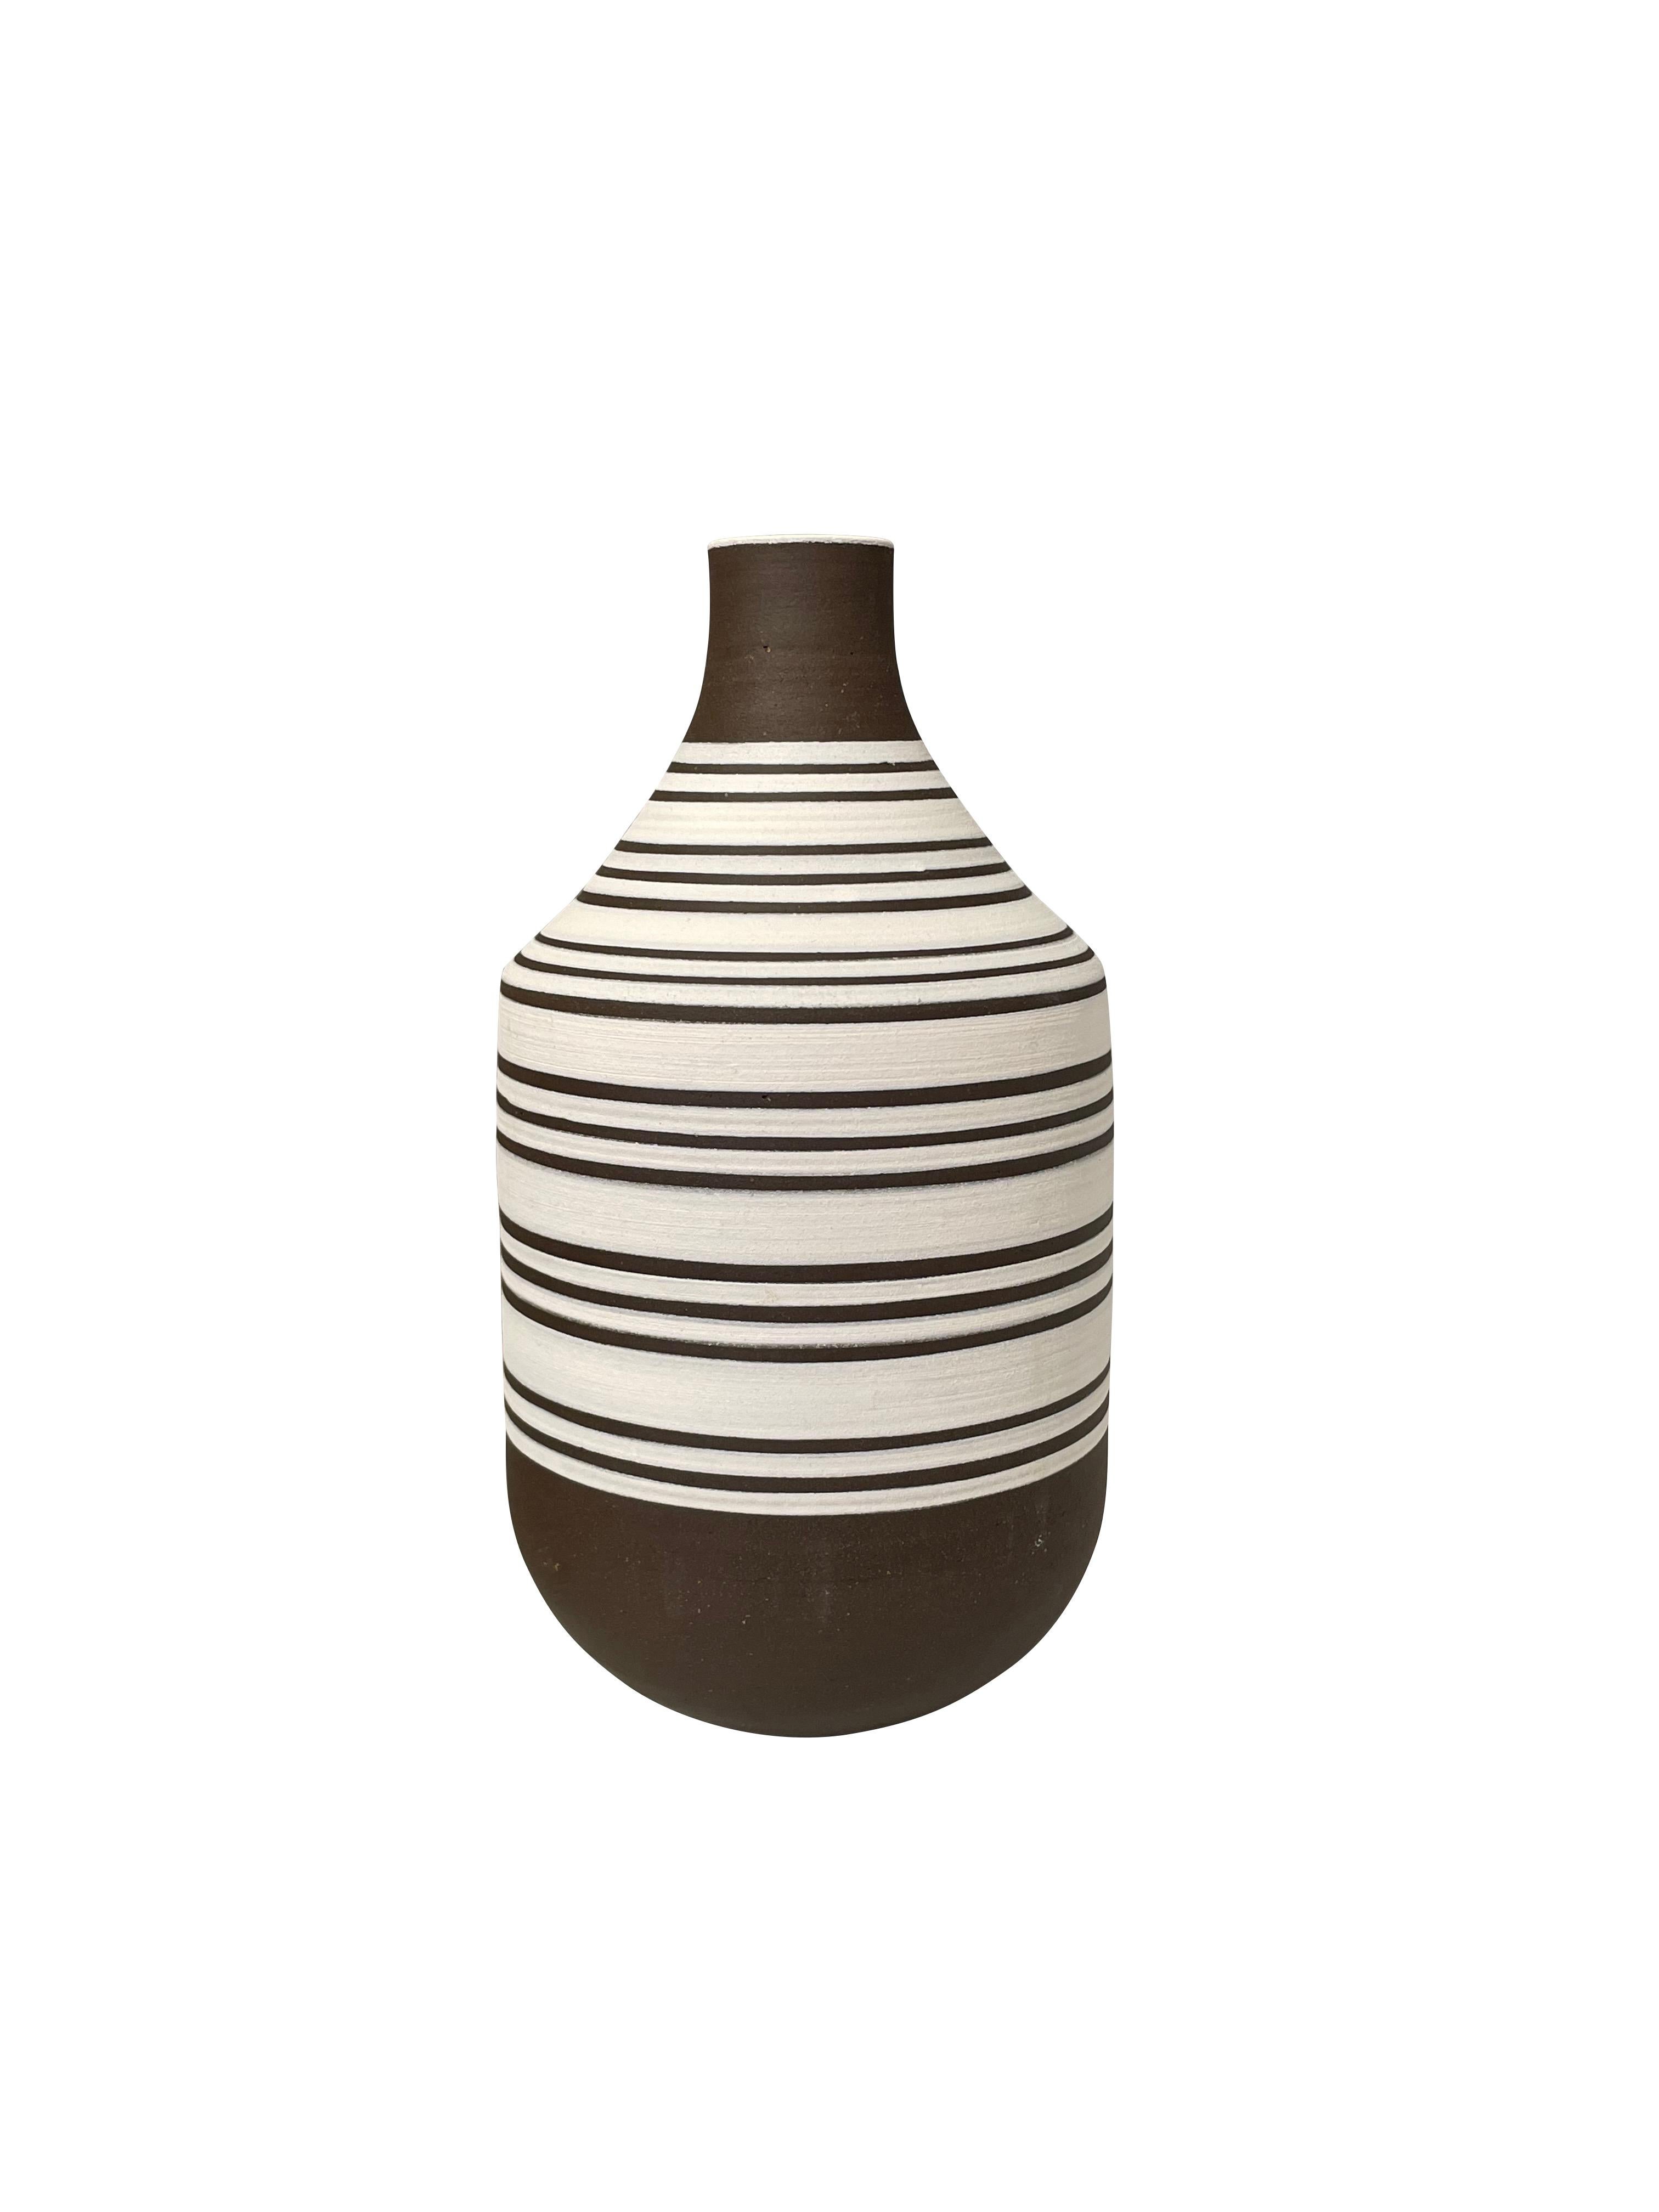 Contemporary Turkish white ground vase with dark brown triple stripes.
Dark brown top and bottom with small opening.
Can hold water.
Two available and sold individually.